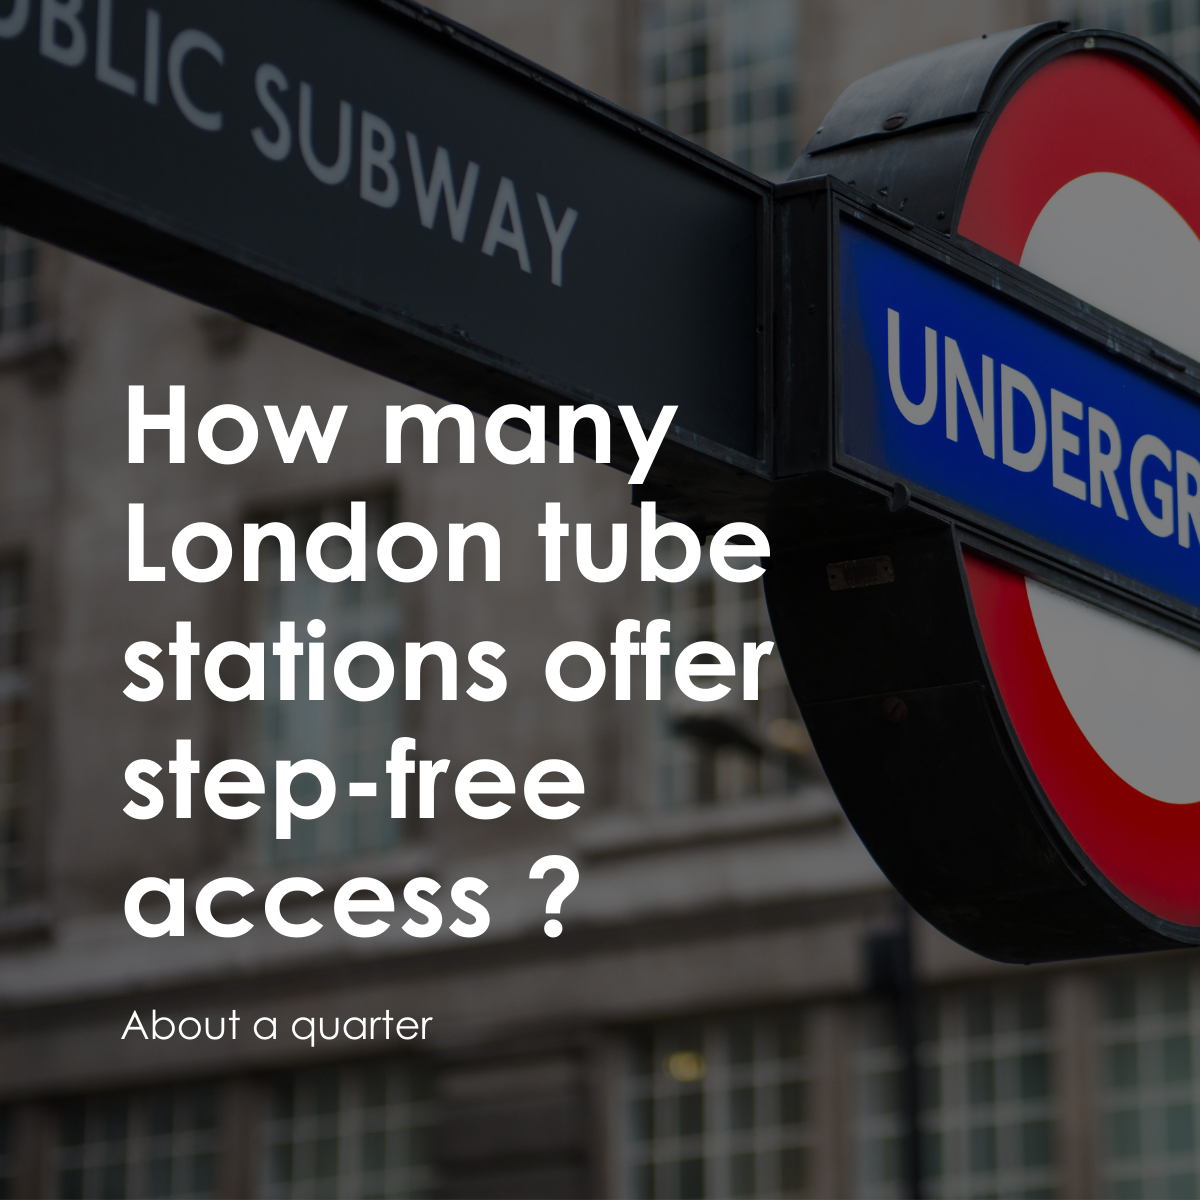 Image reading "How many  London tube stations offer step-free access? About one quarter"